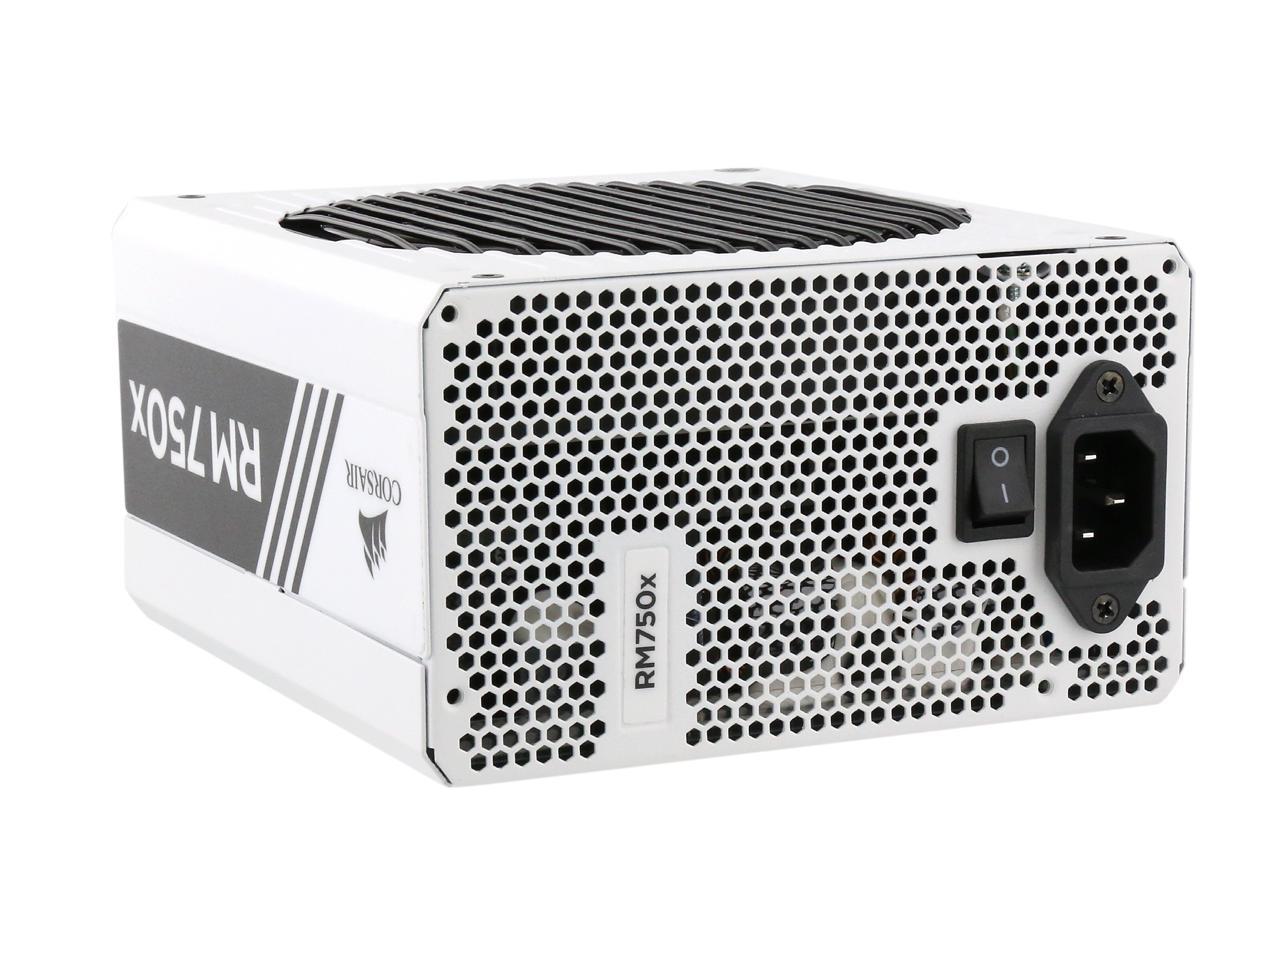 CORSAIR RMx White Series RM750x White (CP-9020187-NA) 750W 80 PLUS Gold  Certified, Fully Modular Power Supply, 10 Year Warranty